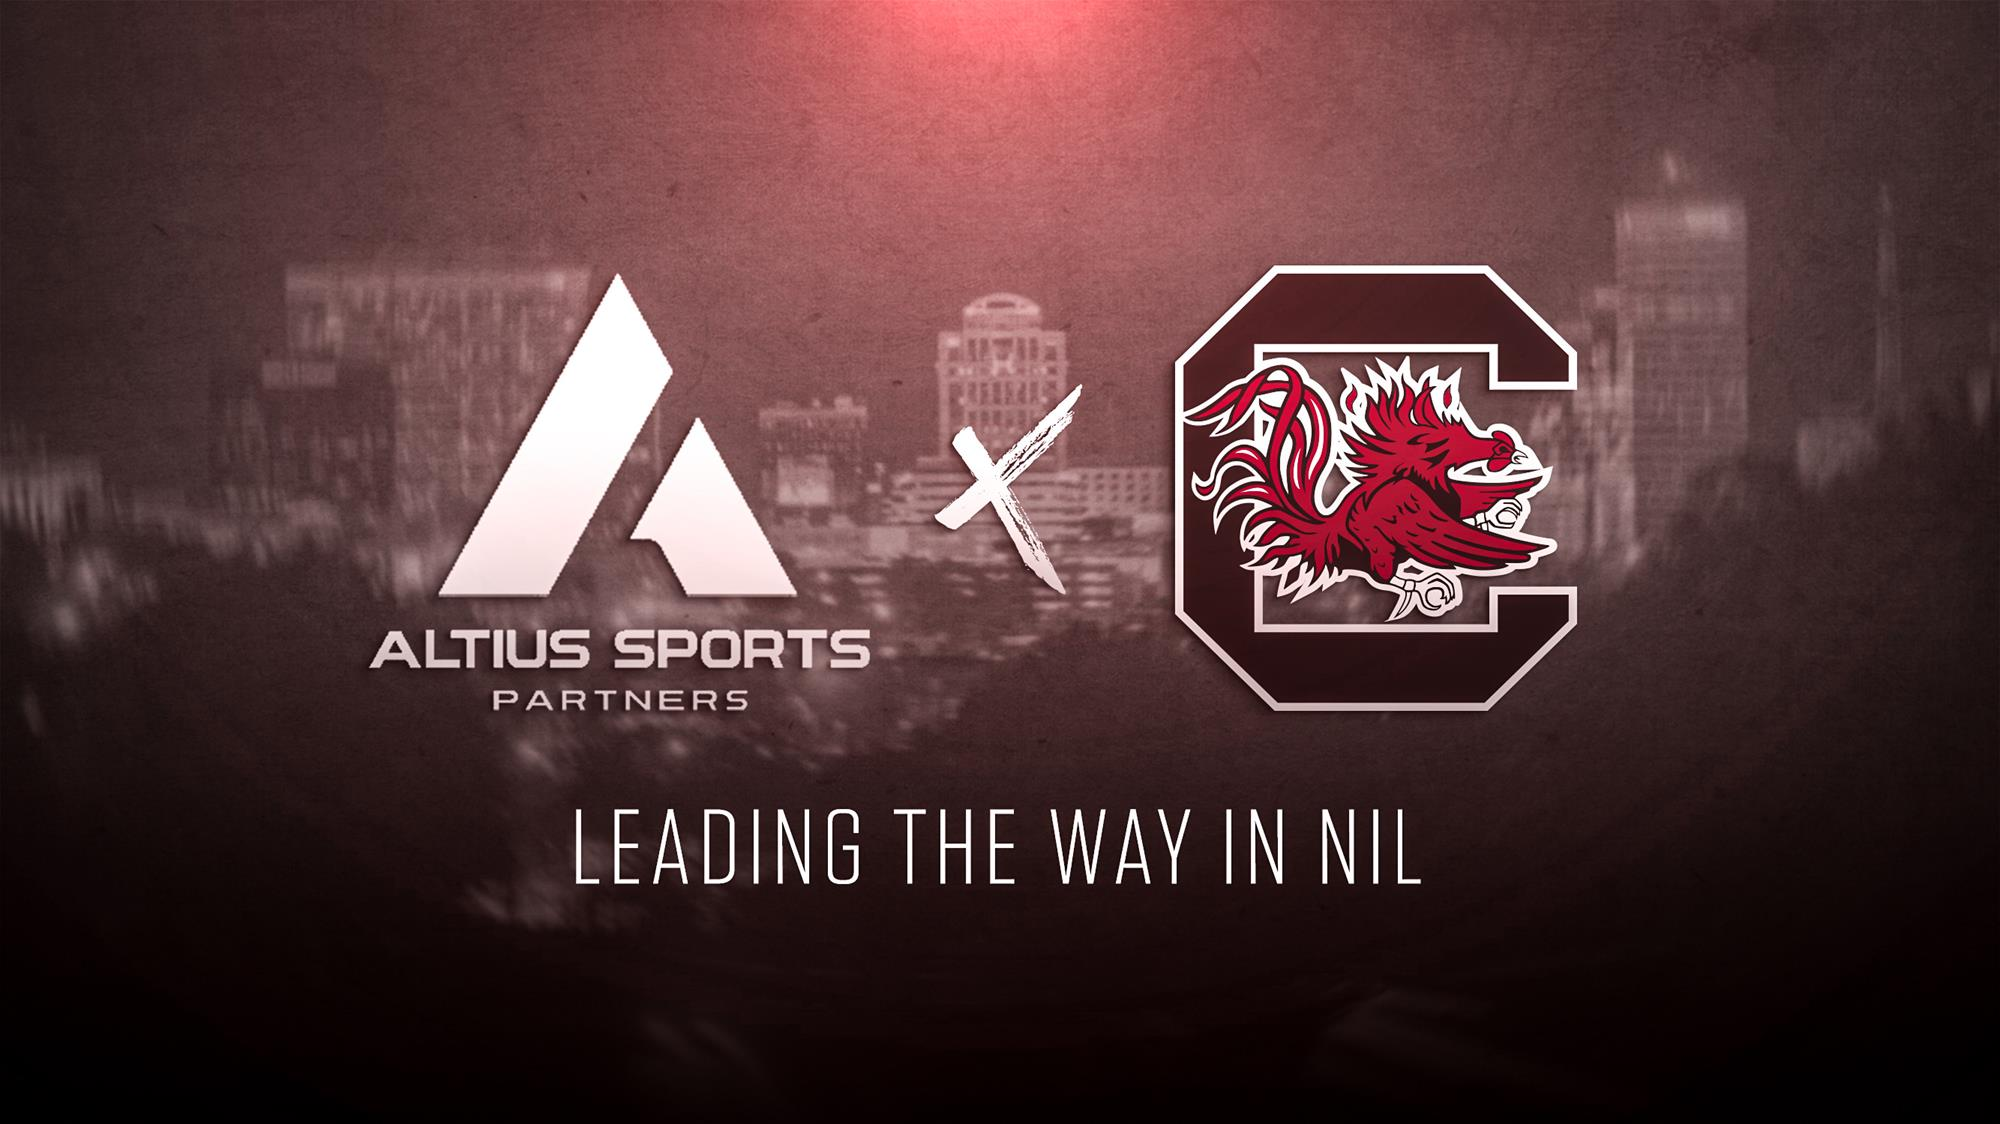 South Carolina Announces Partnership with Altius Sports Partners to Help Prepare for New NIL Landscape